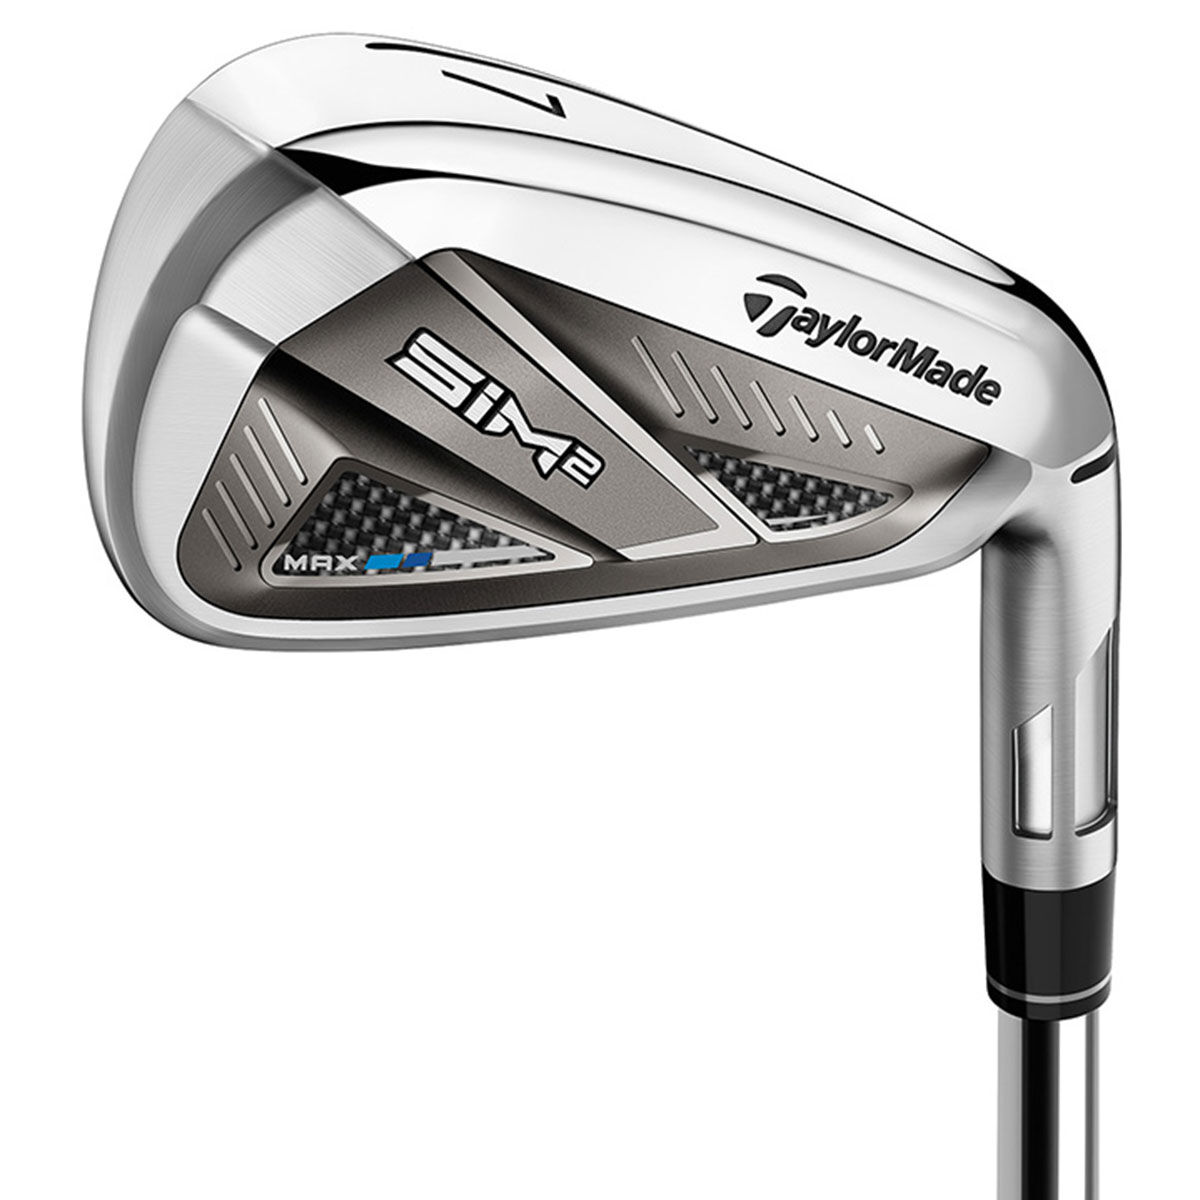 TaylorMade SIM2 MAX Graphite Golf Irons, Mens, 5-sw (7 irons), Right hand, Graphite, Regular | American Golf von TaylorMade